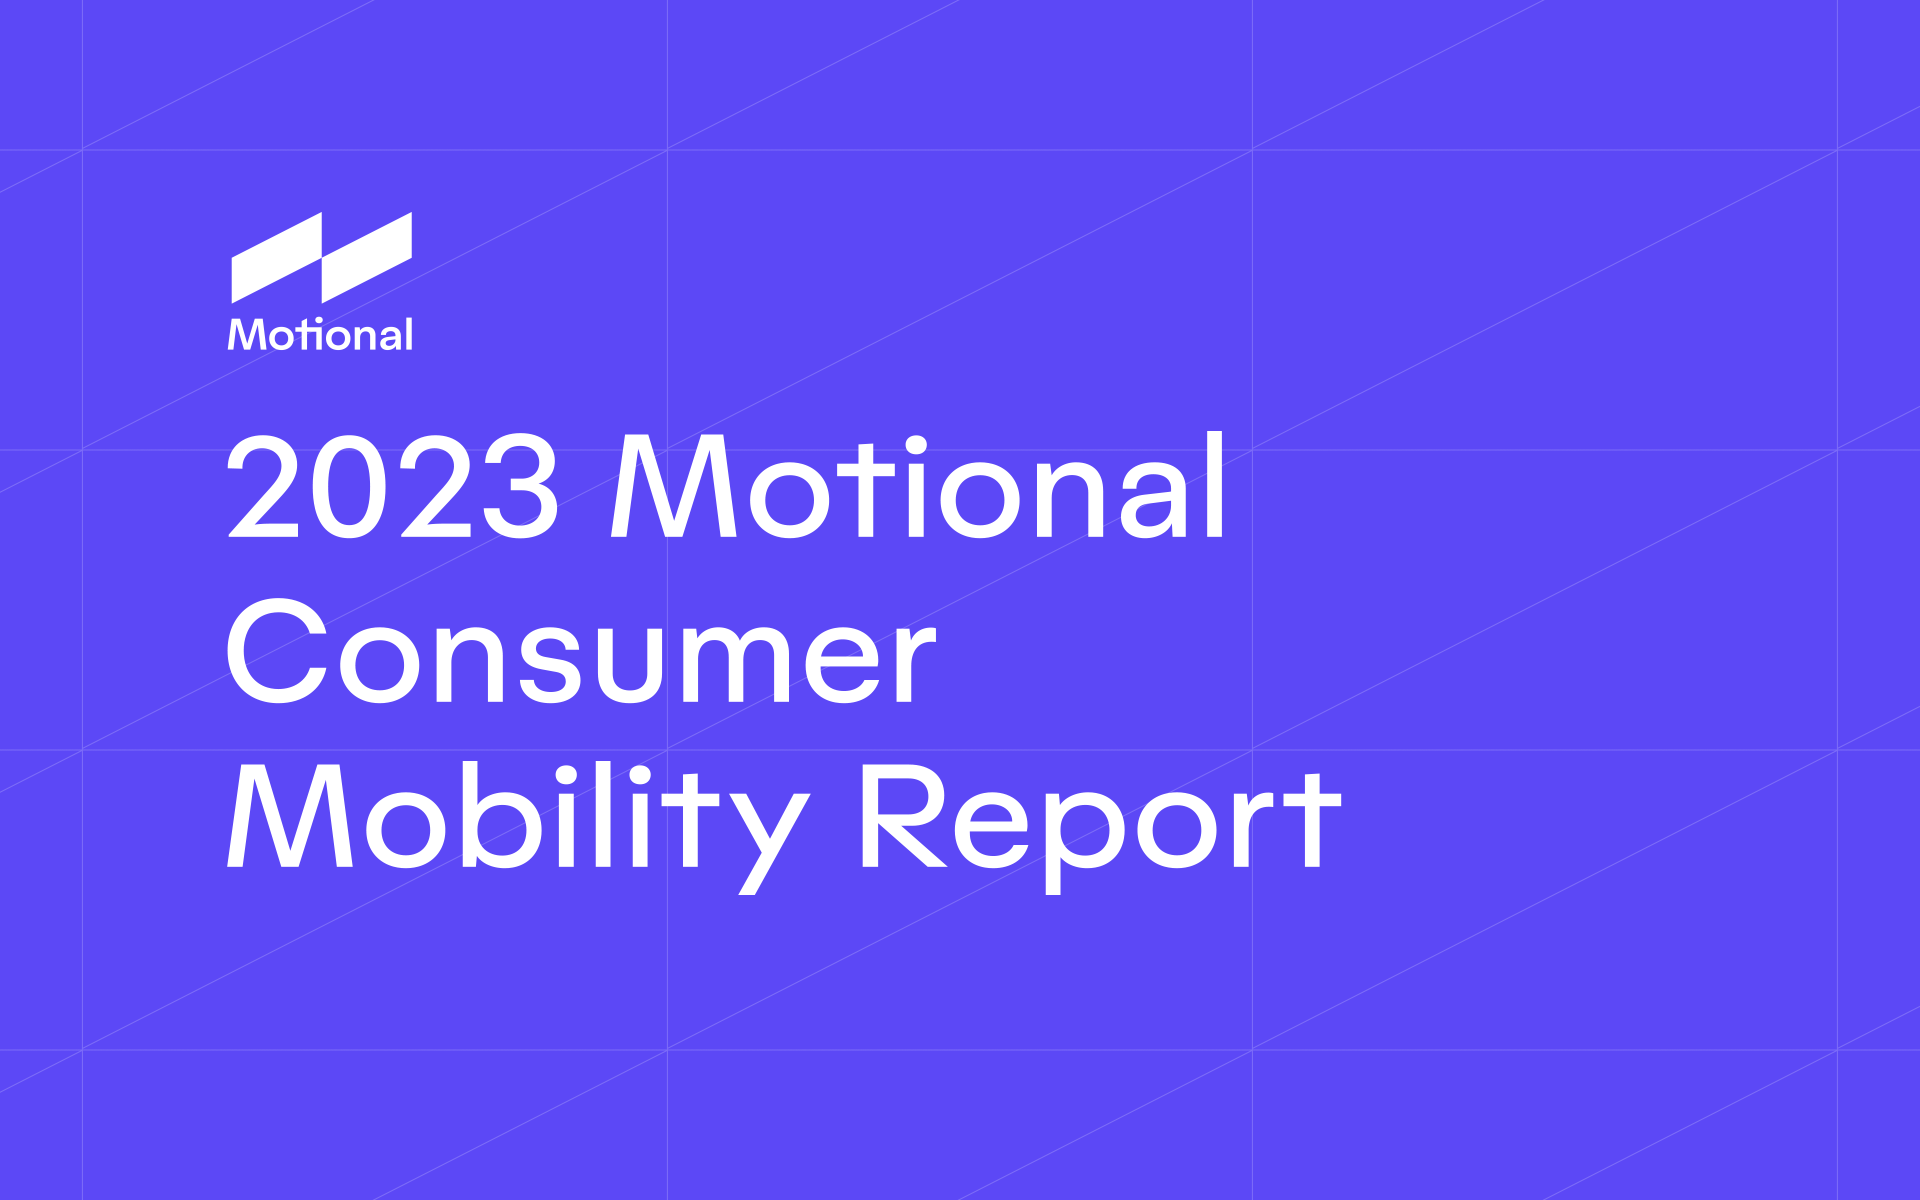 2023 Motional Consumer Mobility Report